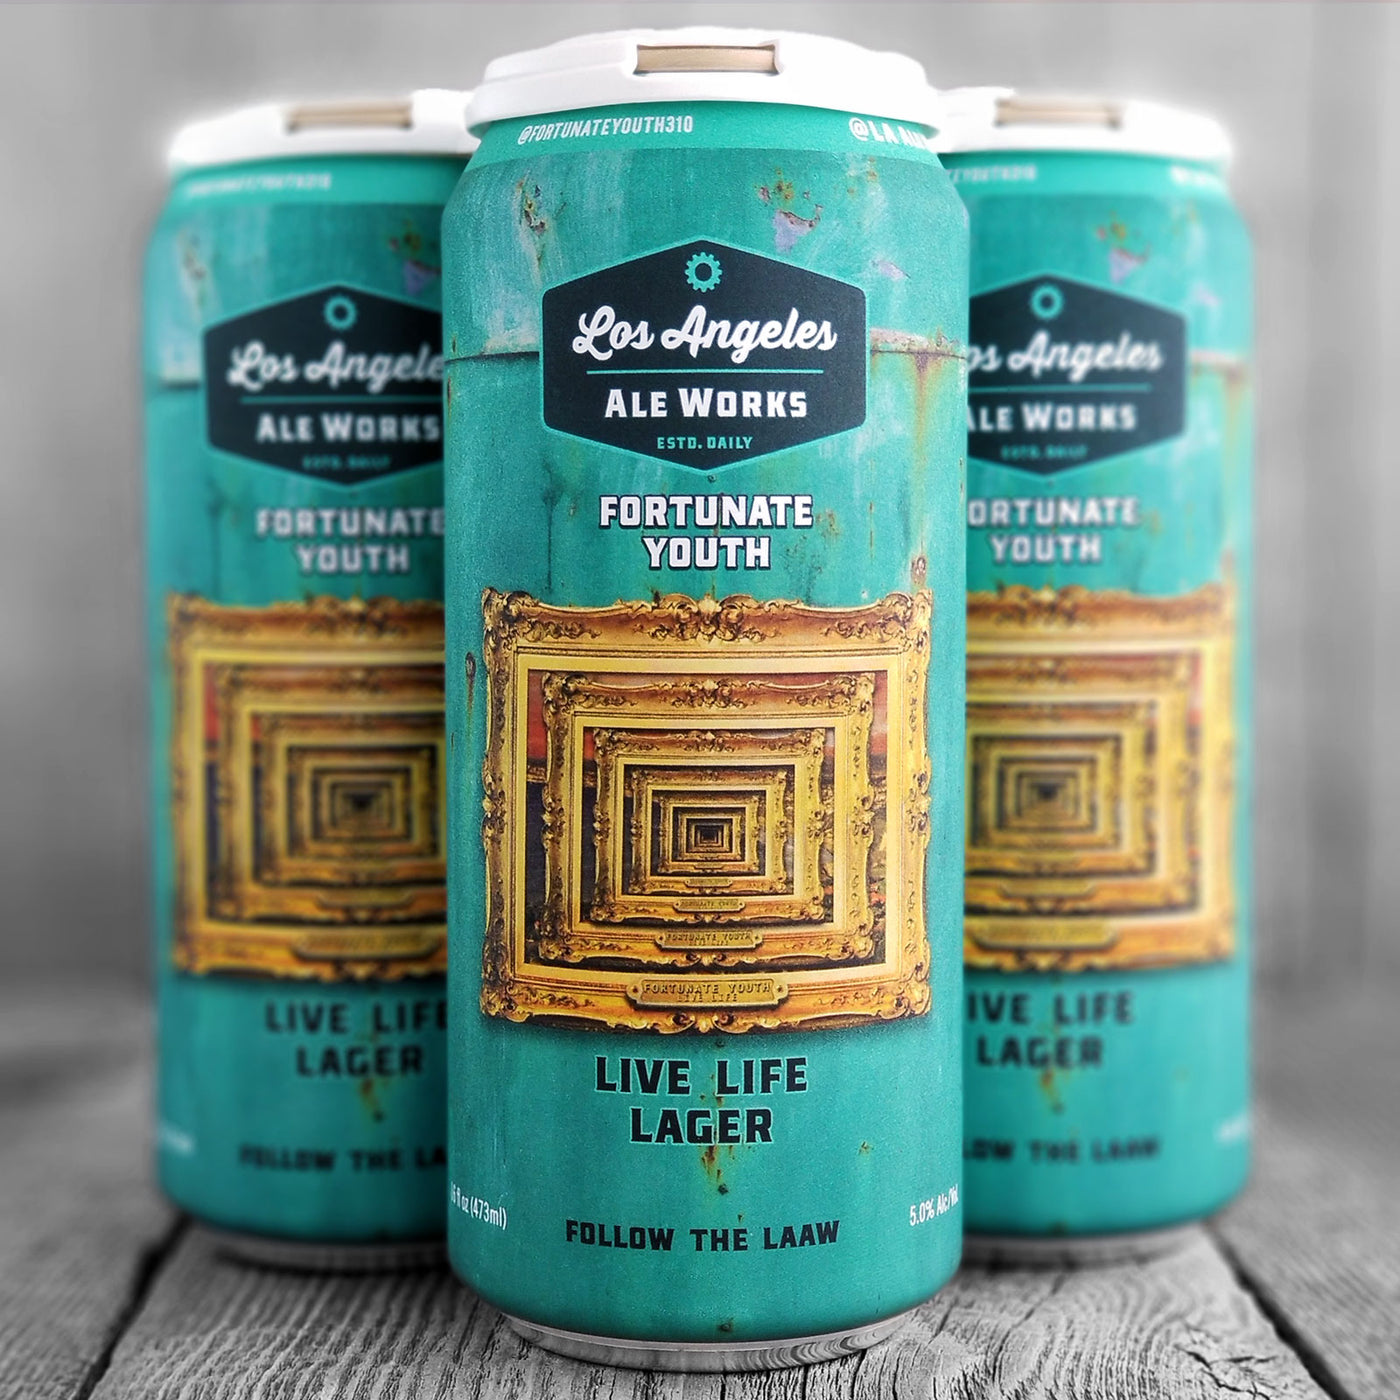 Los Angeles Ale Works / Fortunate Youth - Live Life Lager